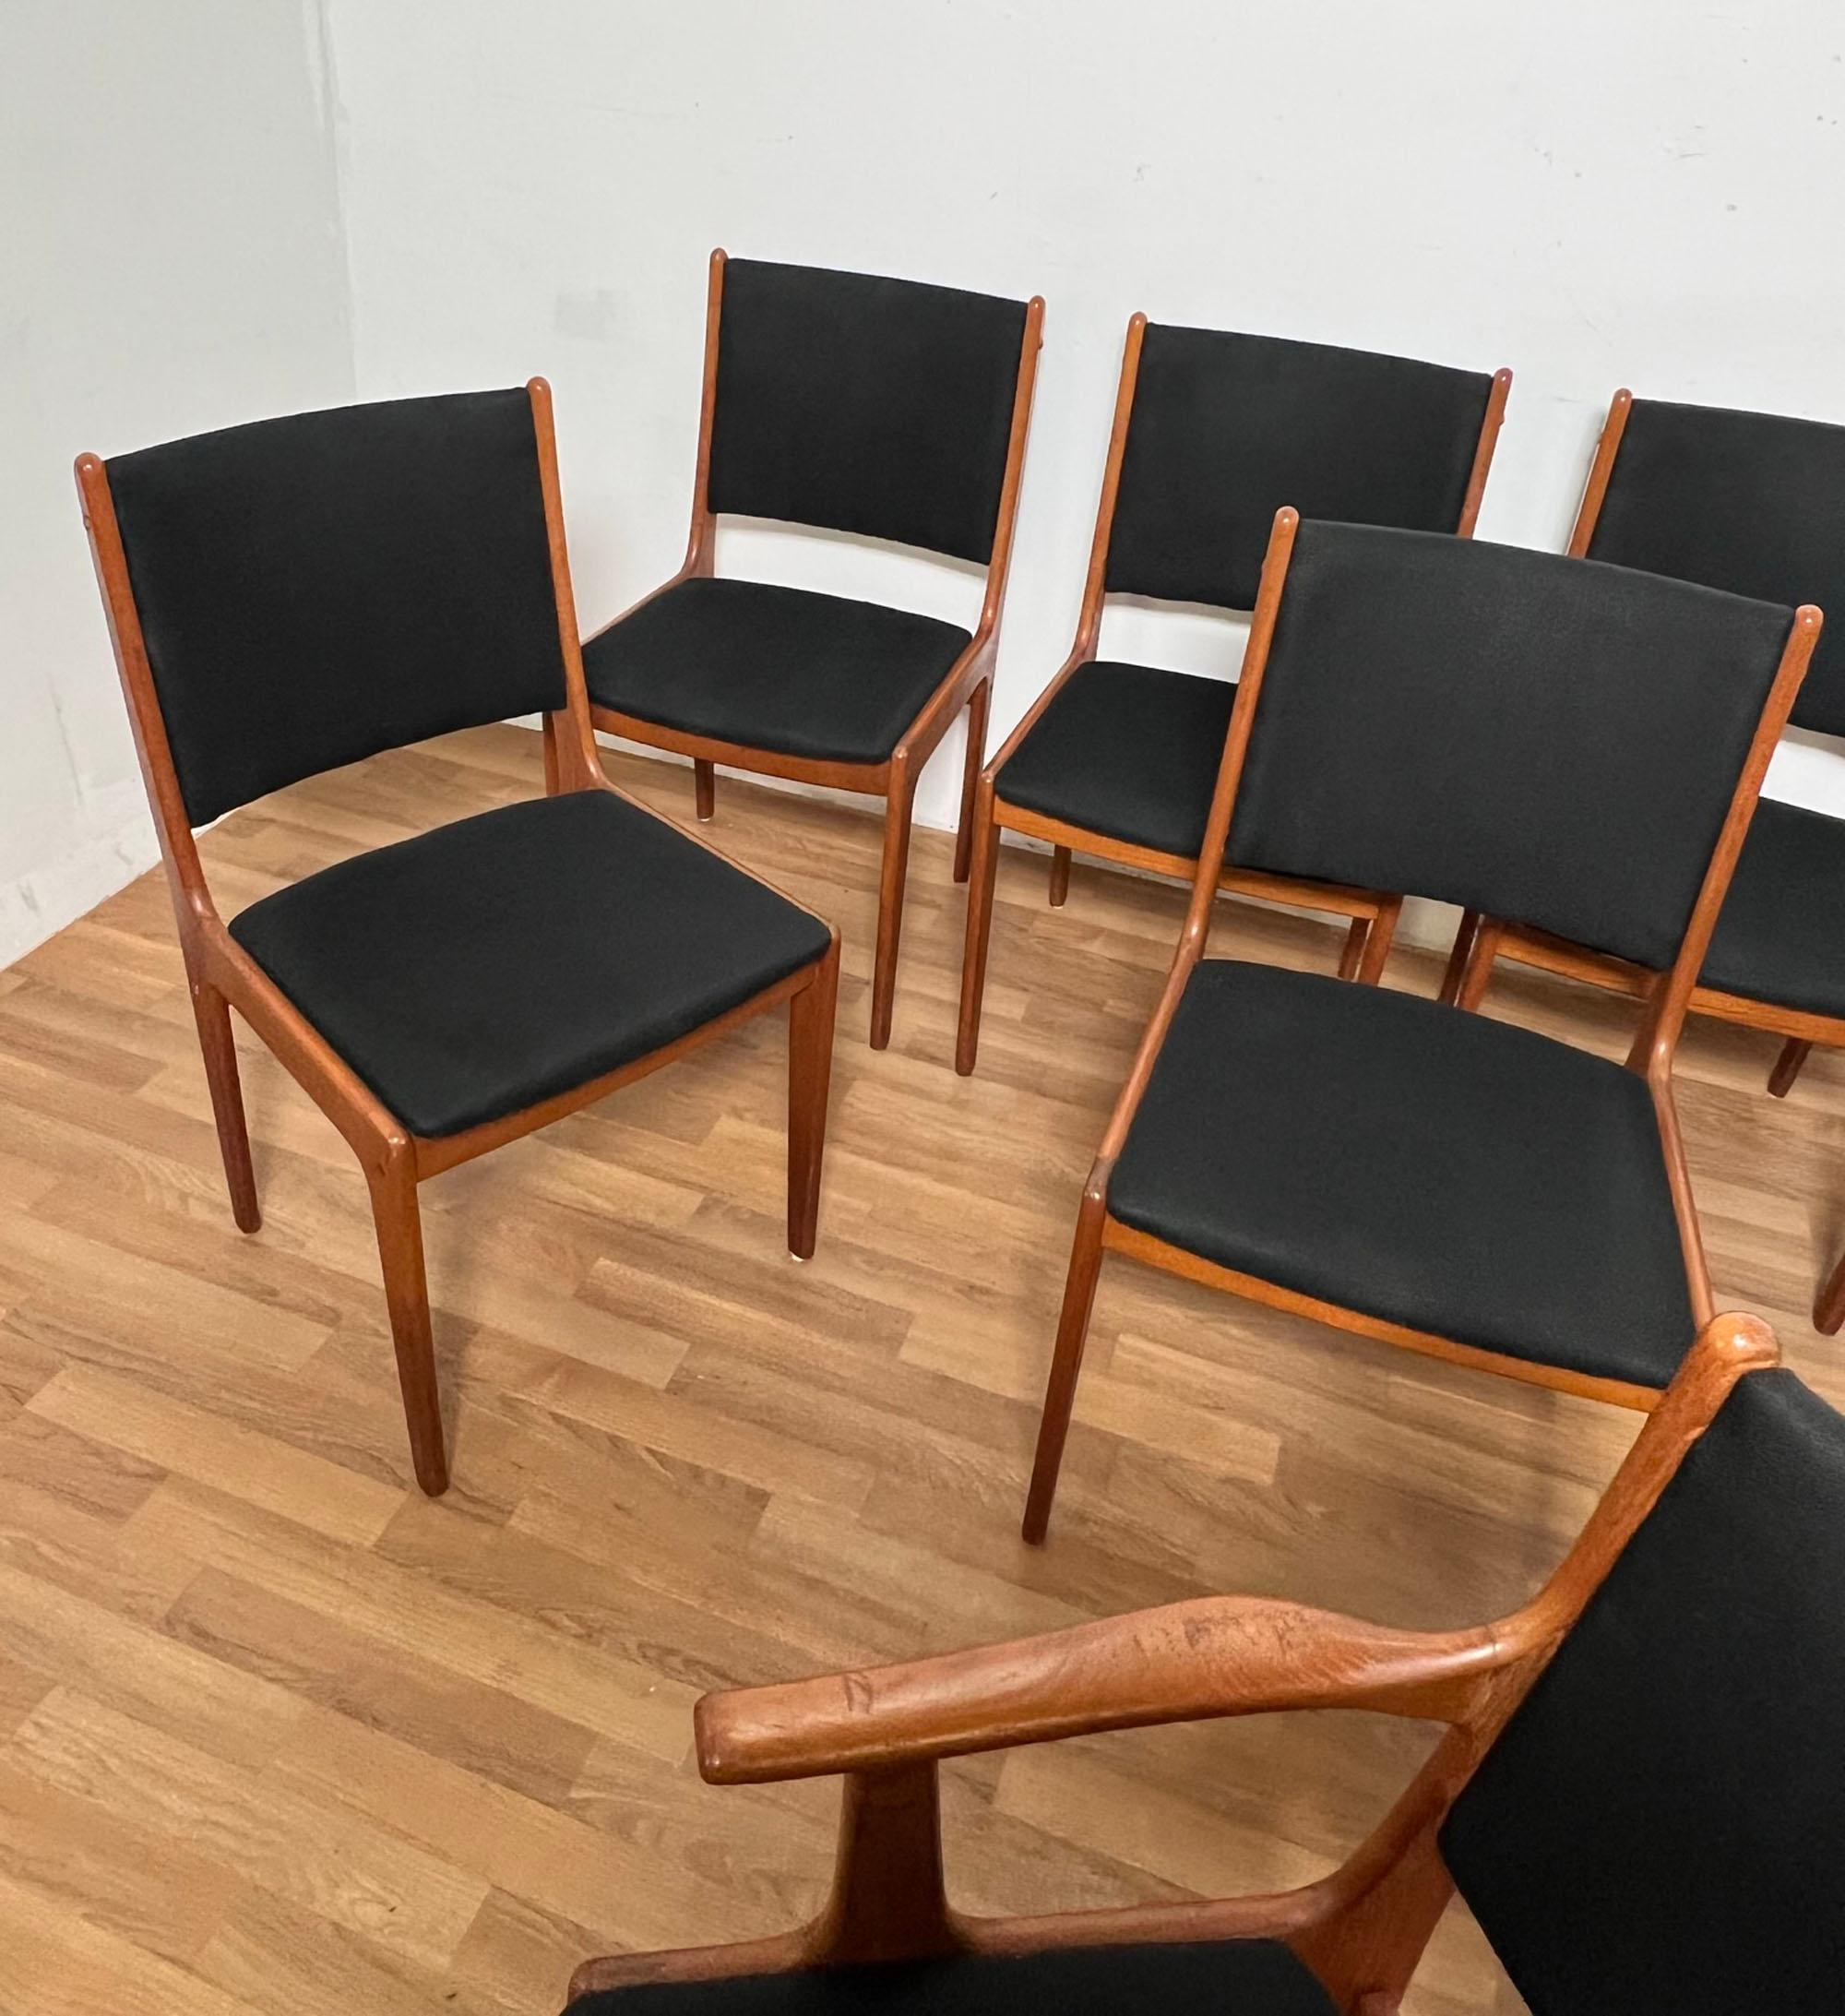 Set of eight Danish teak dining chairs by Johannes Andersen for Uldum Mobelfabrik, consisting of one arm chair and seven sides.

Side chairs measure: 19.25